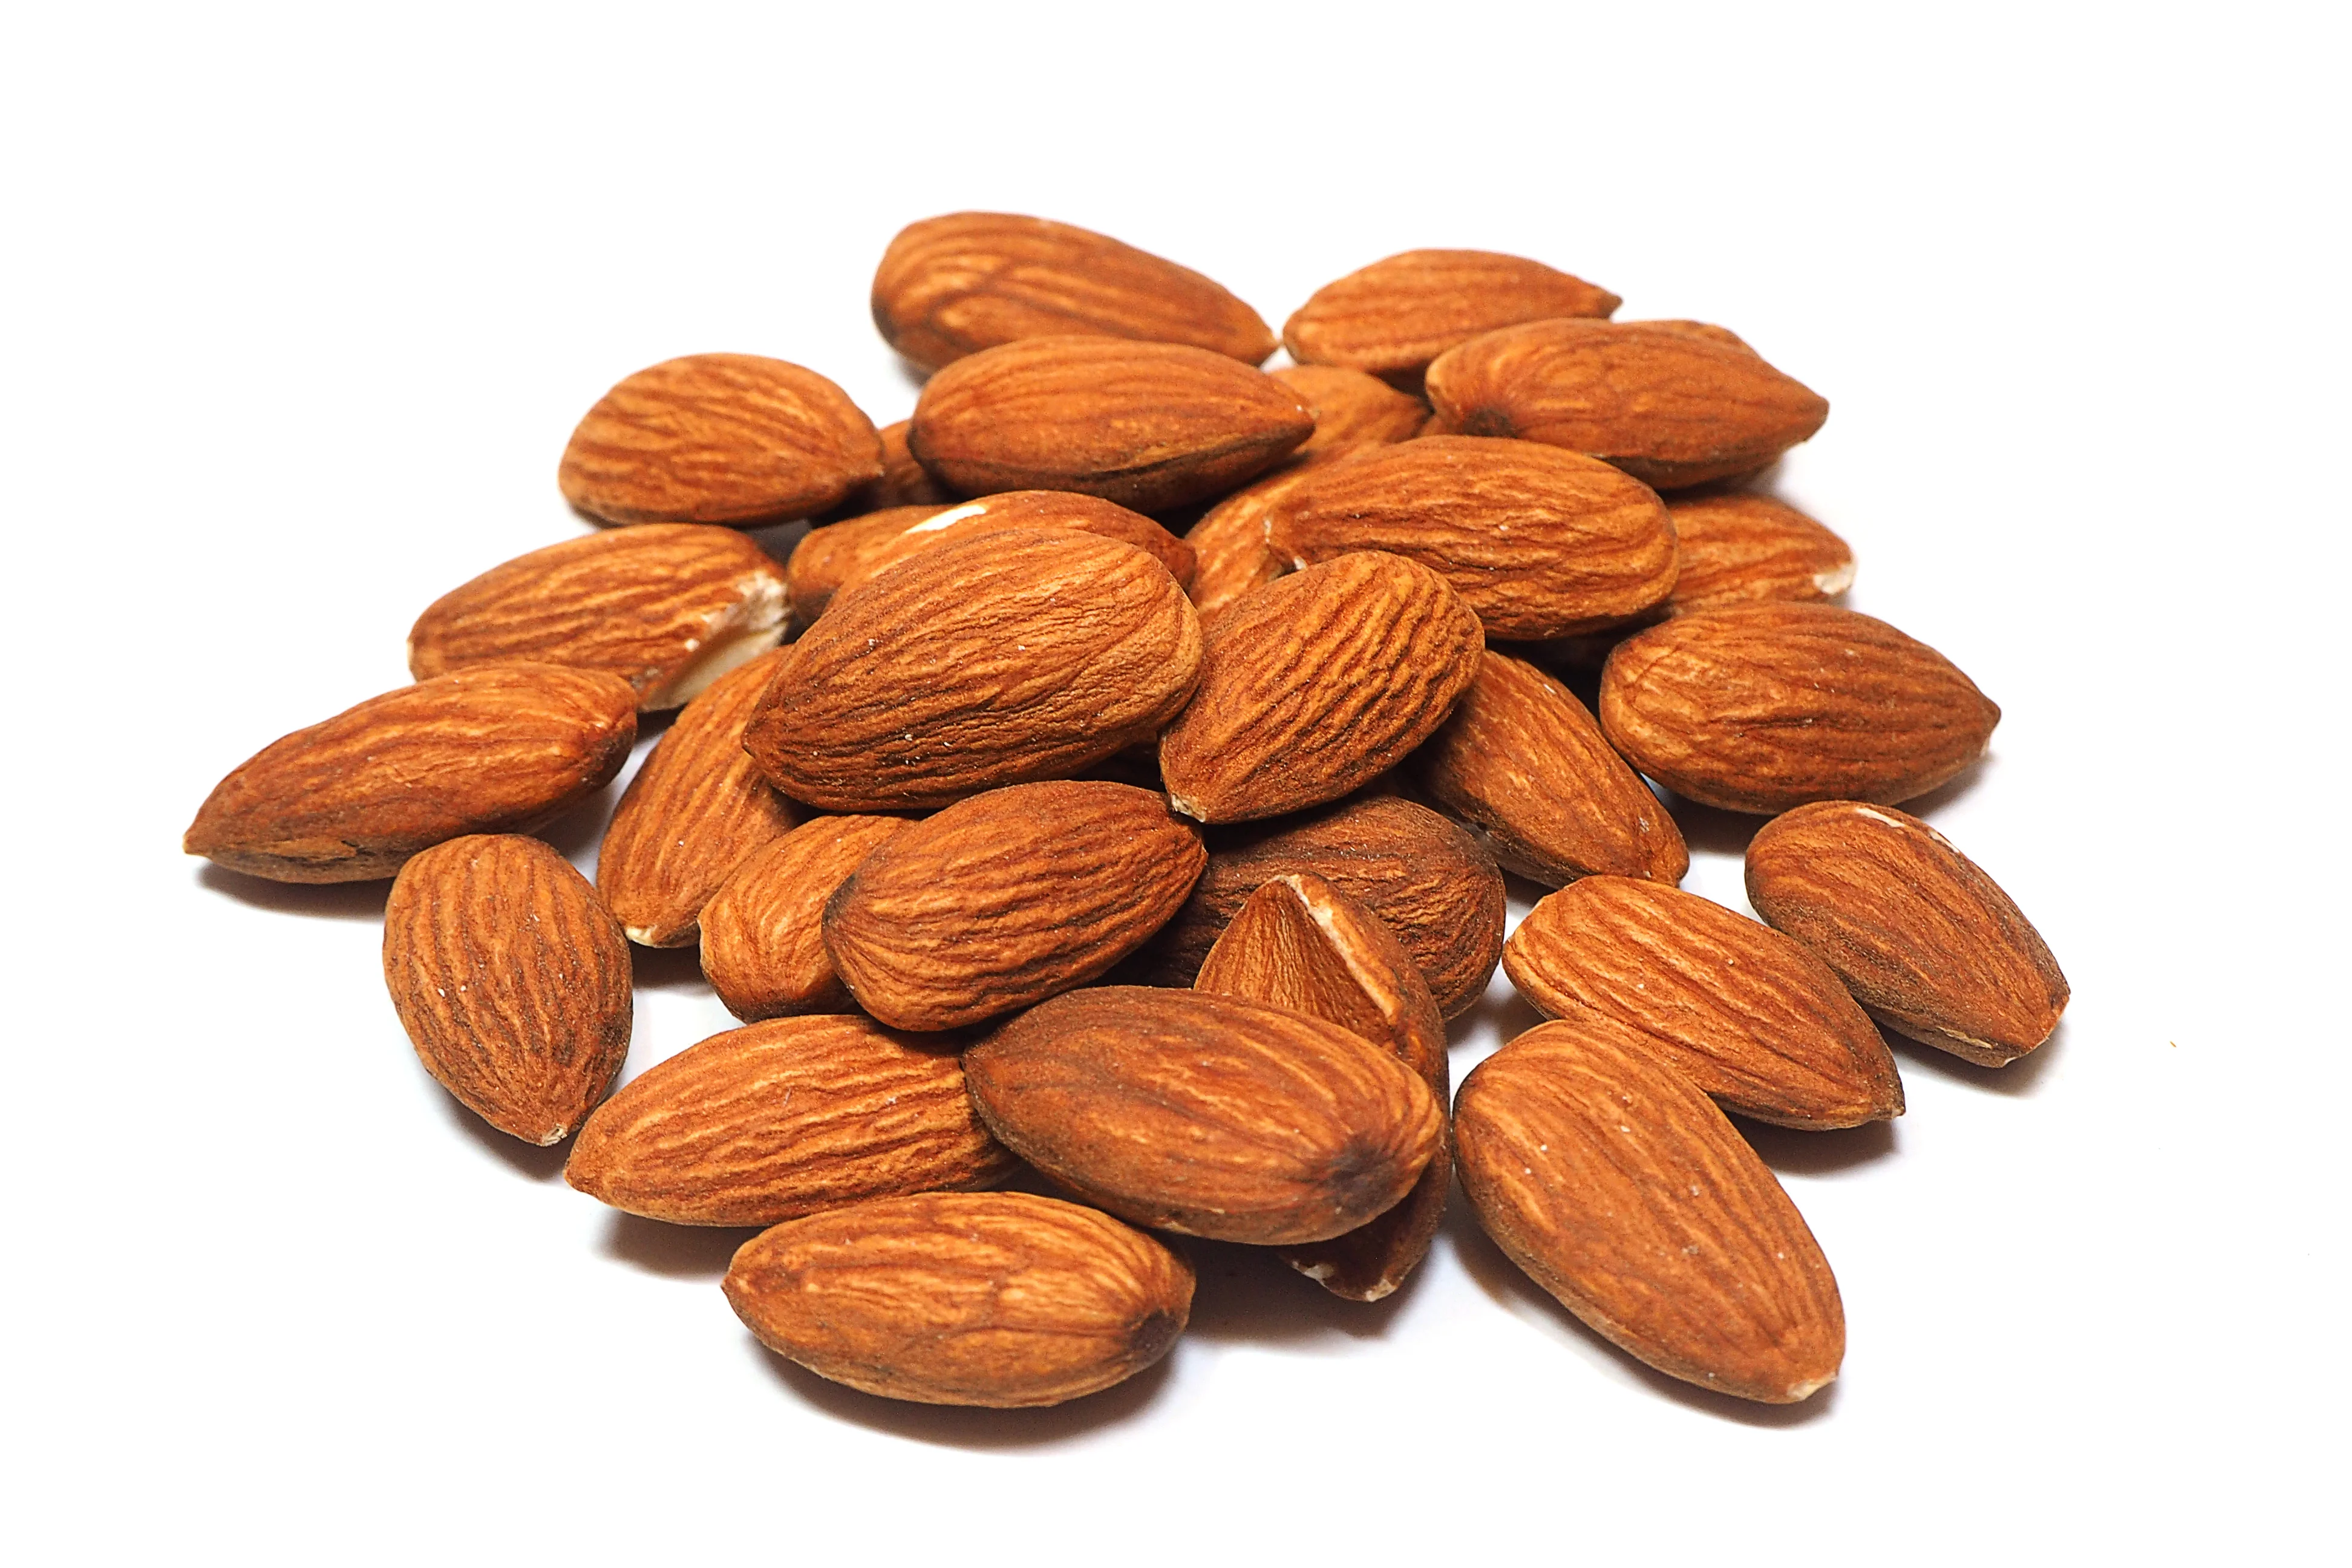 group of almonds isolated on white background